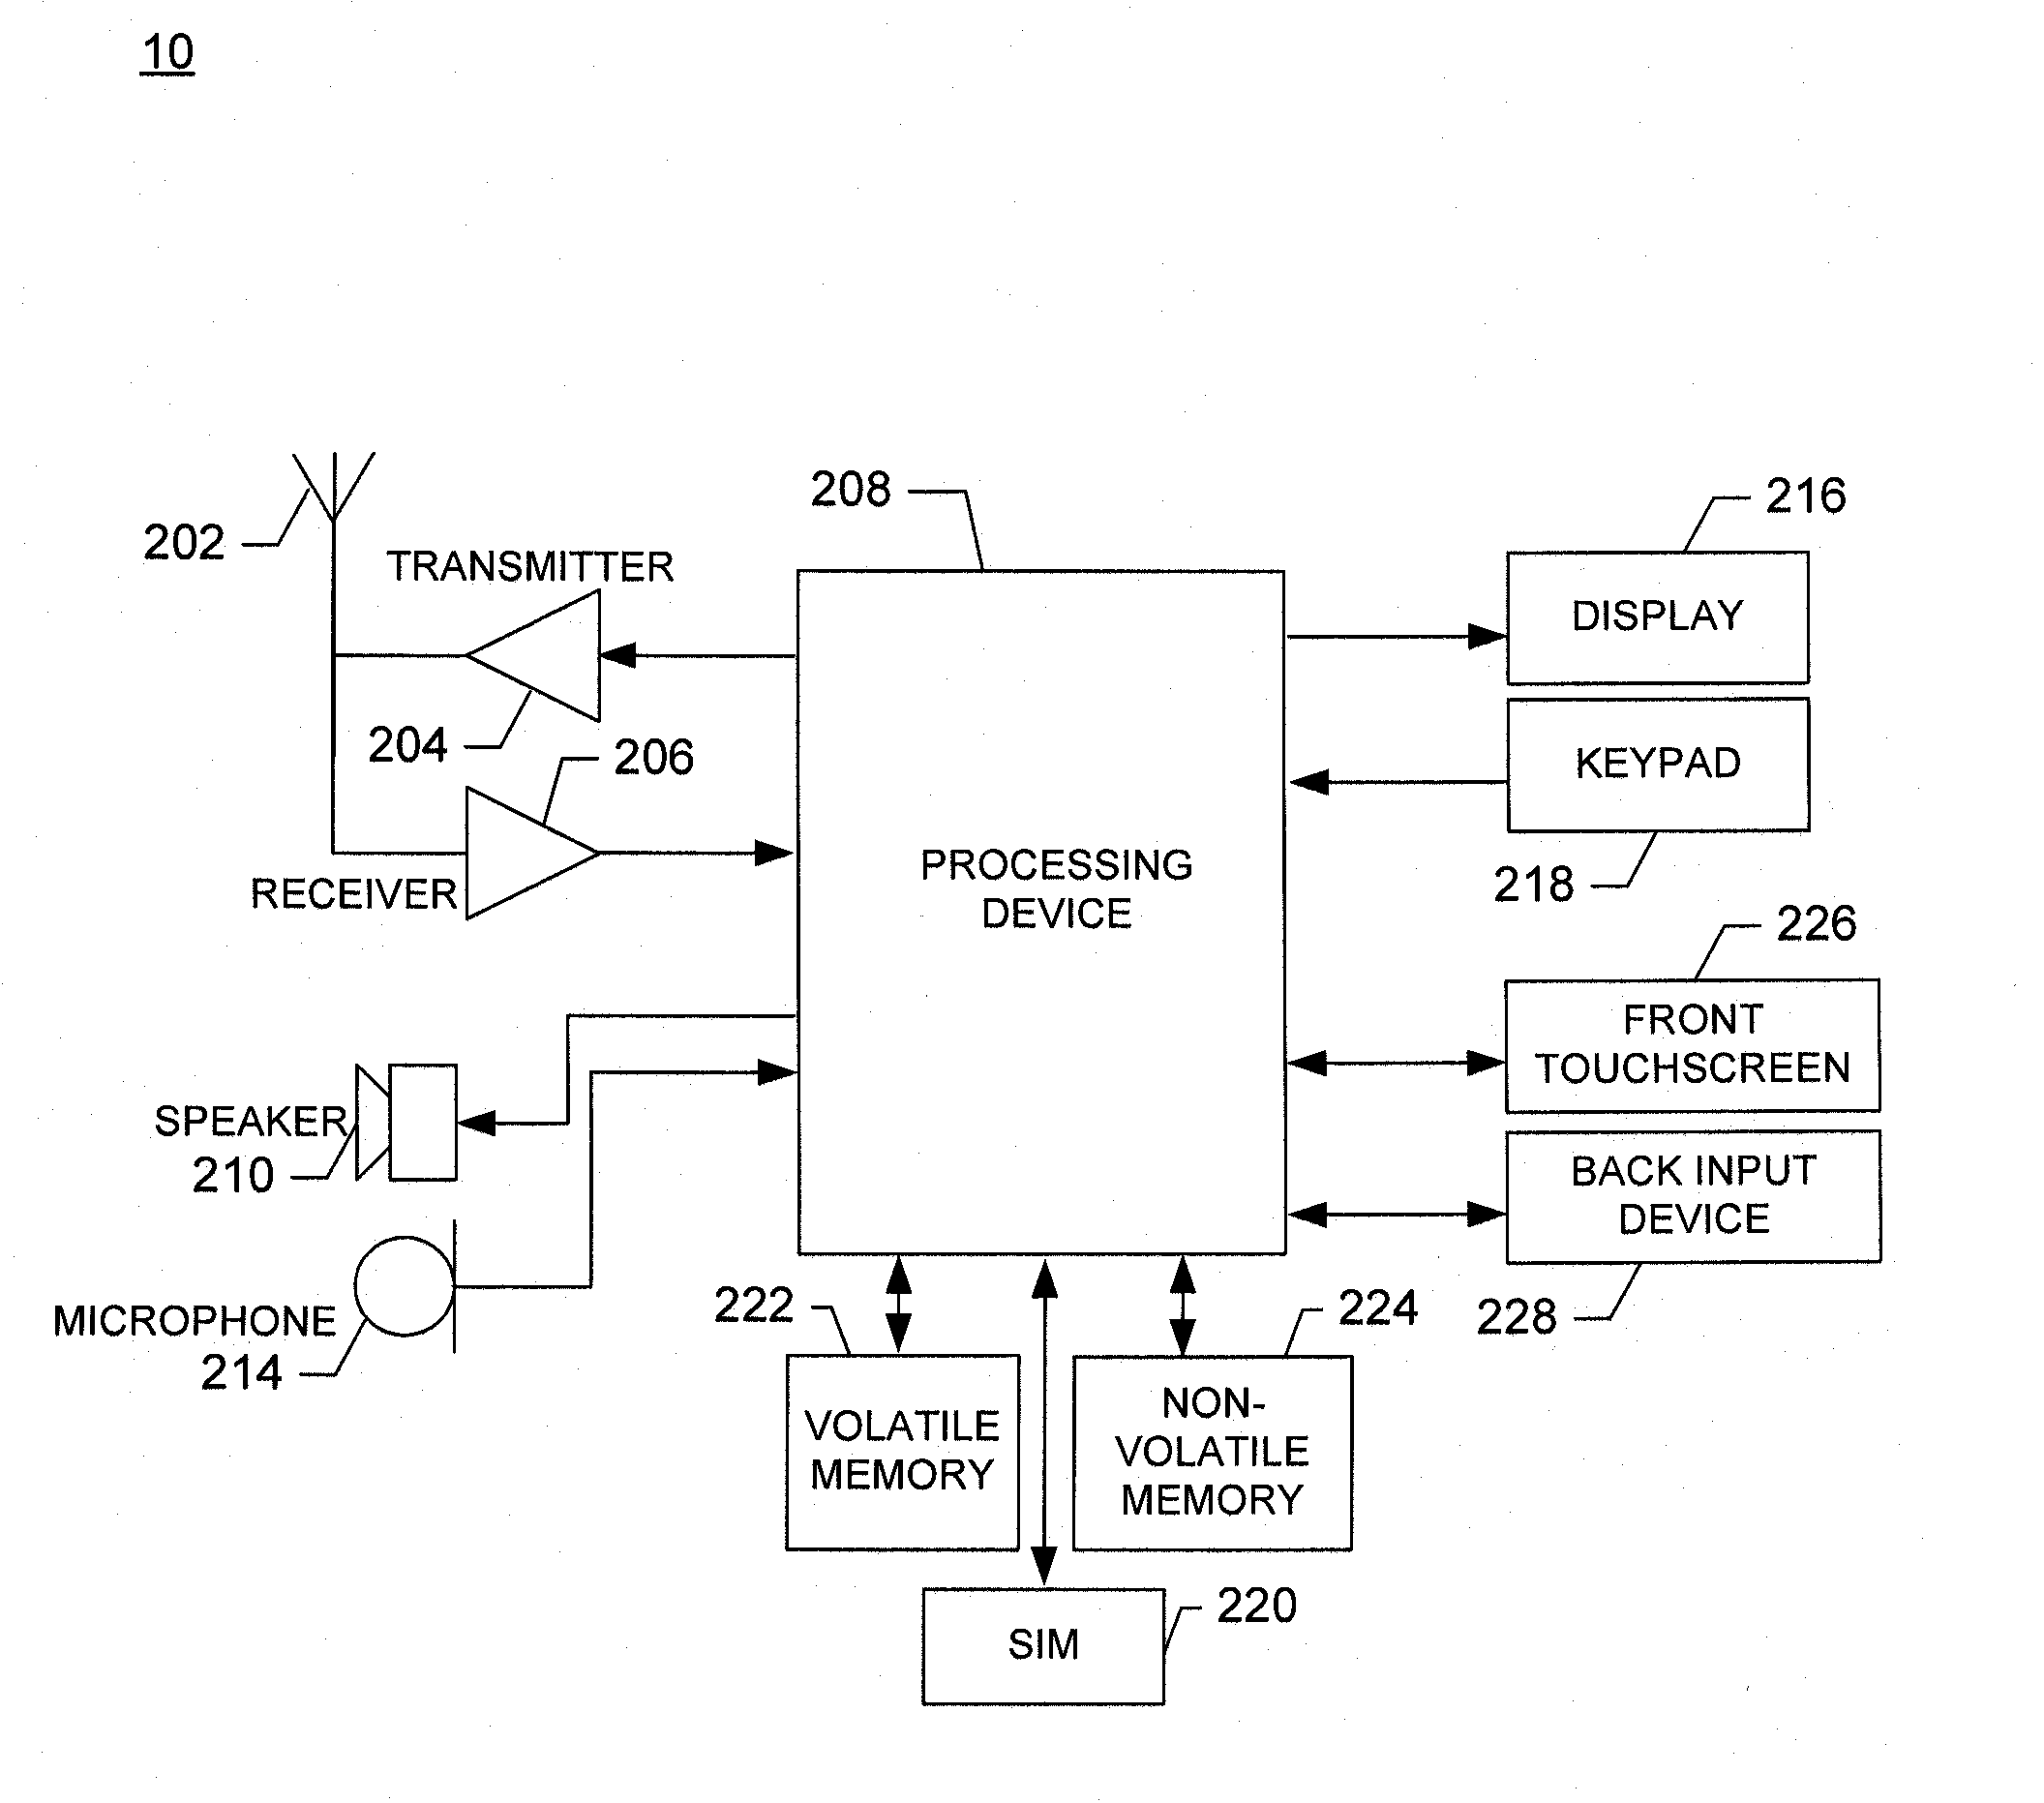 Apparatus, method and computer program product for manipulating a device using dual side input devices